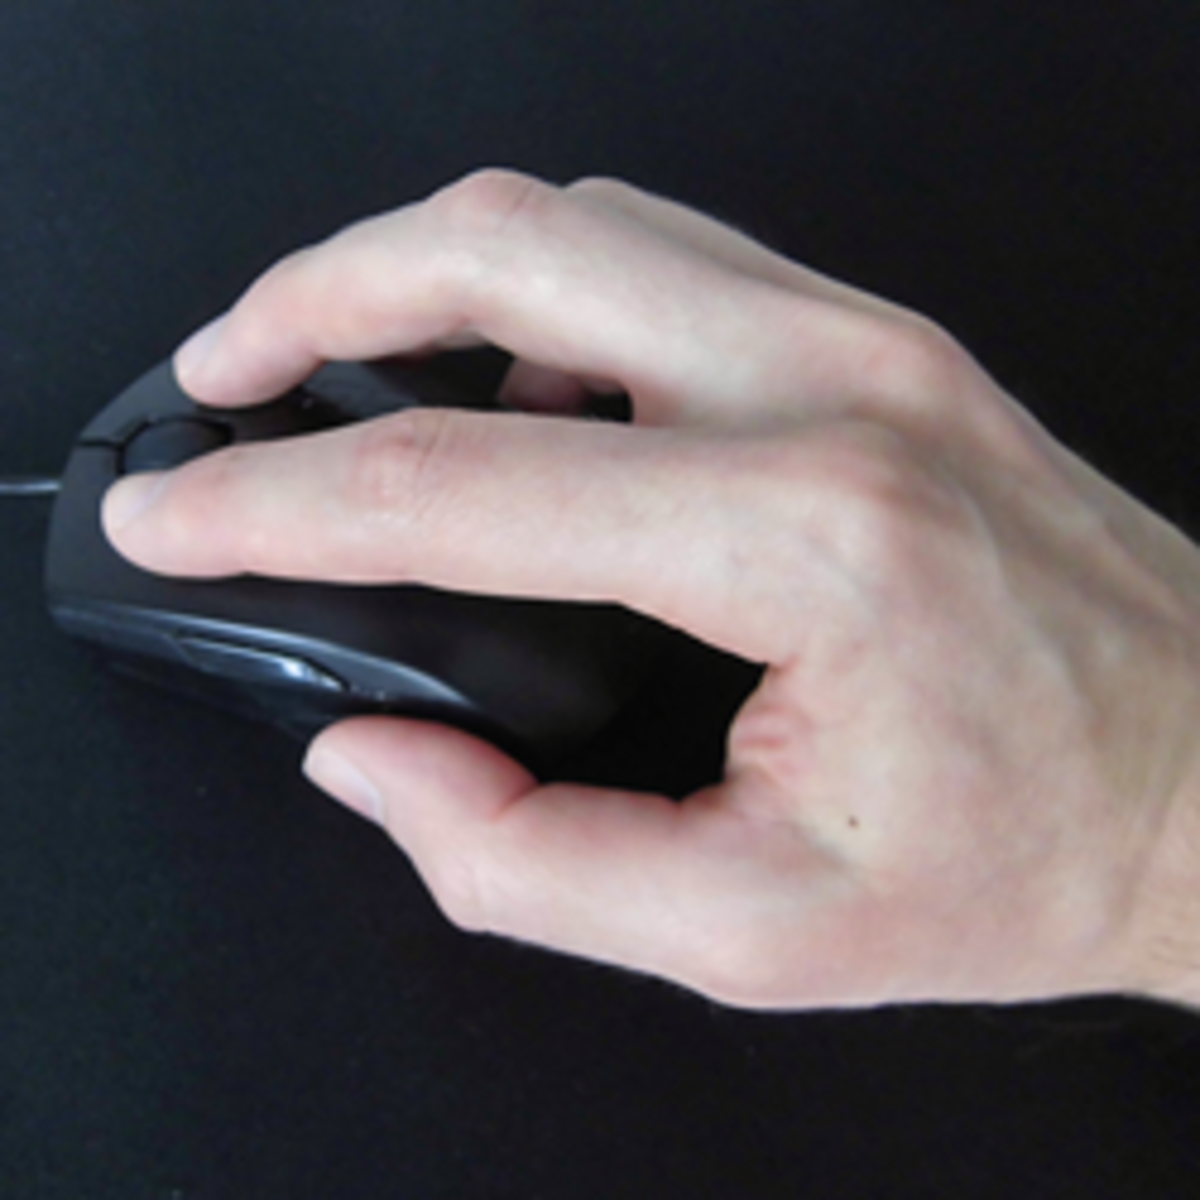 Fingertip grip with a Roccat Pyra mouse